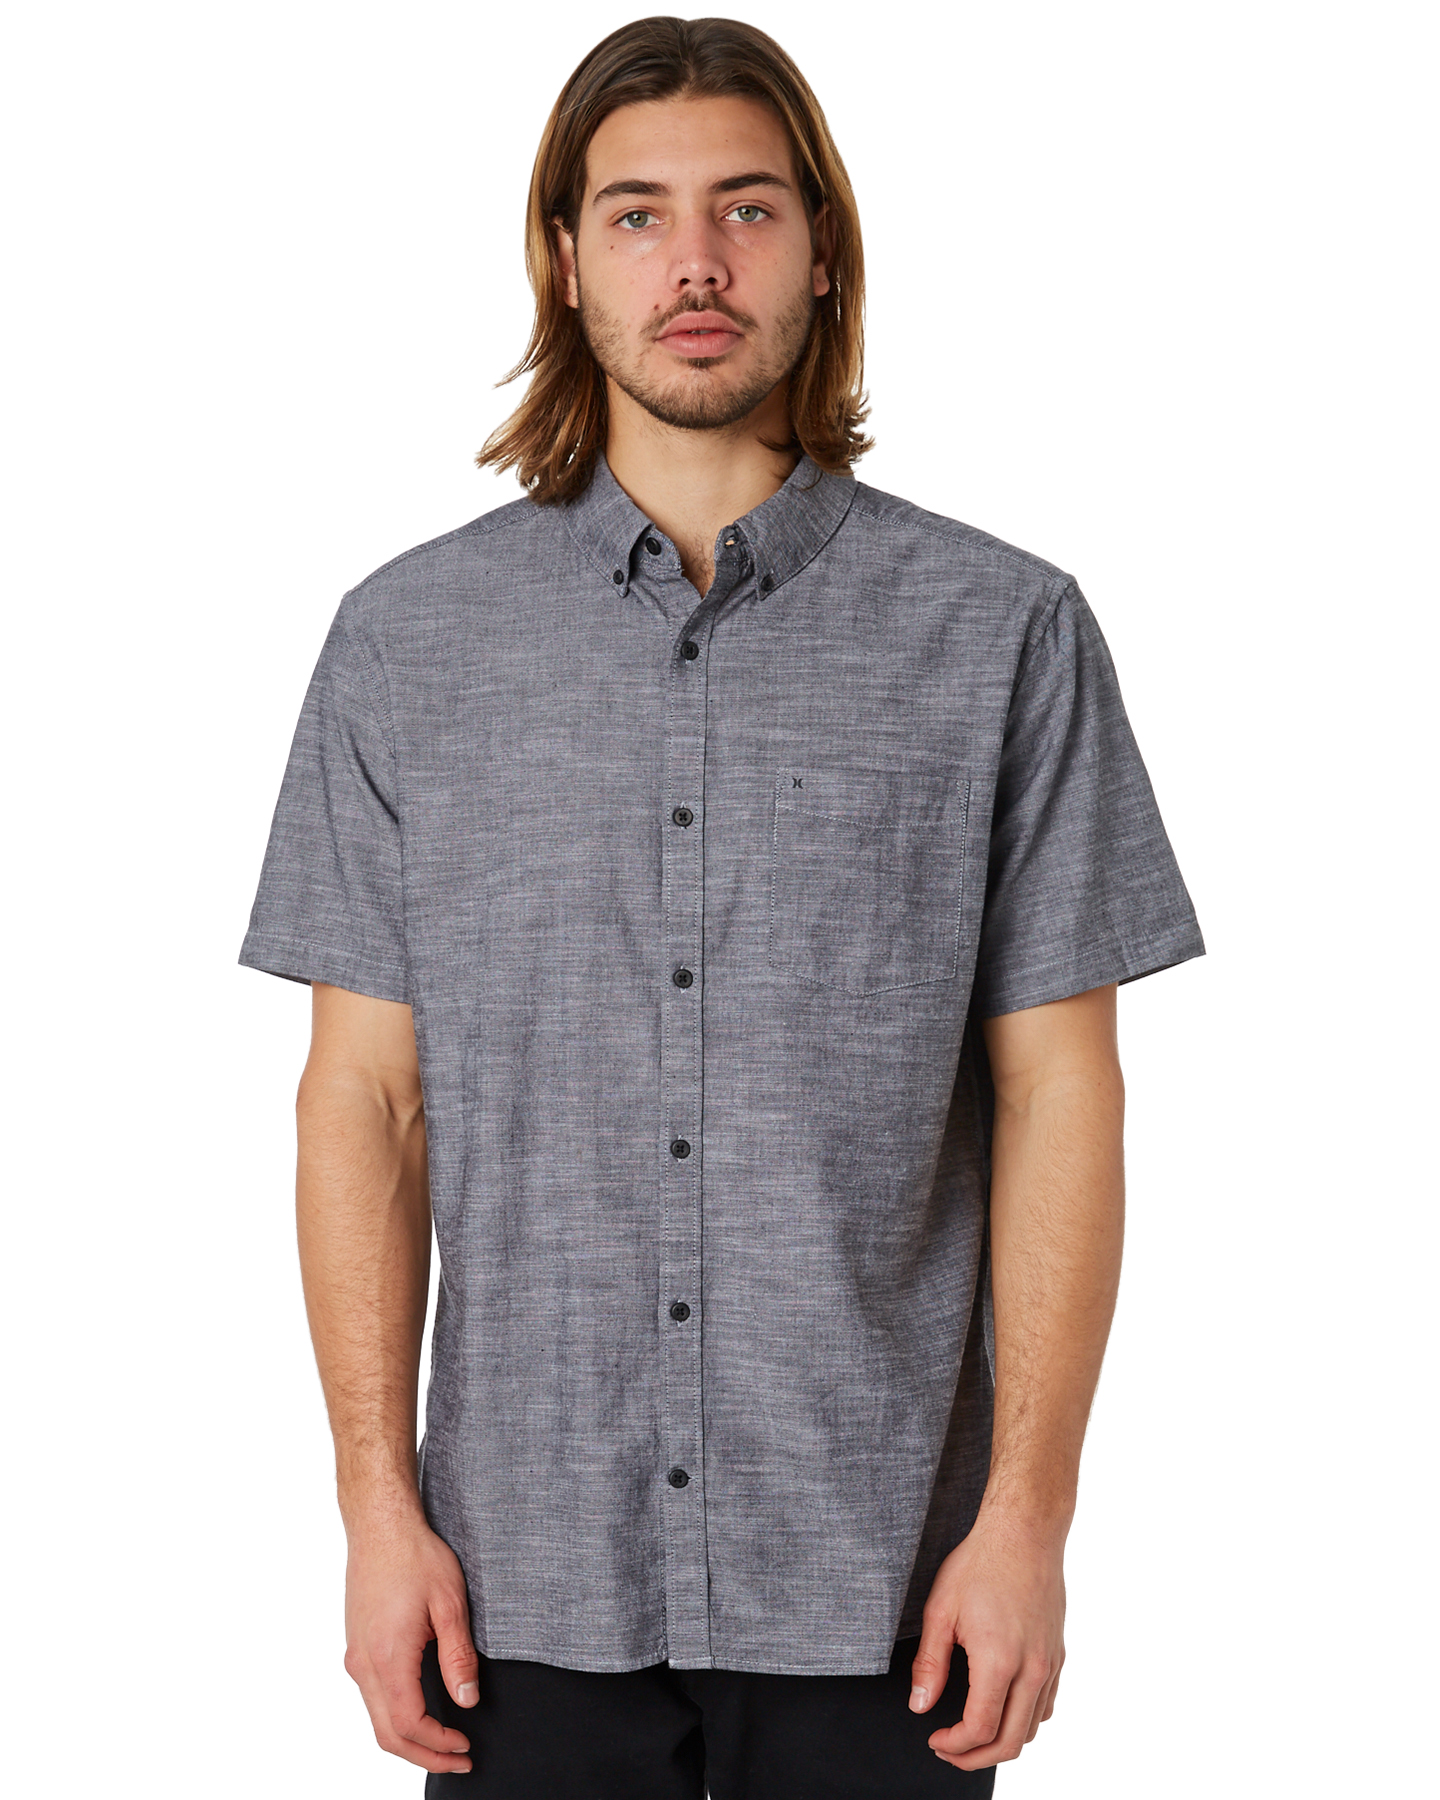 Hurley One And Only 2 0 Mens Ss Shirt - Black | SurfStitch